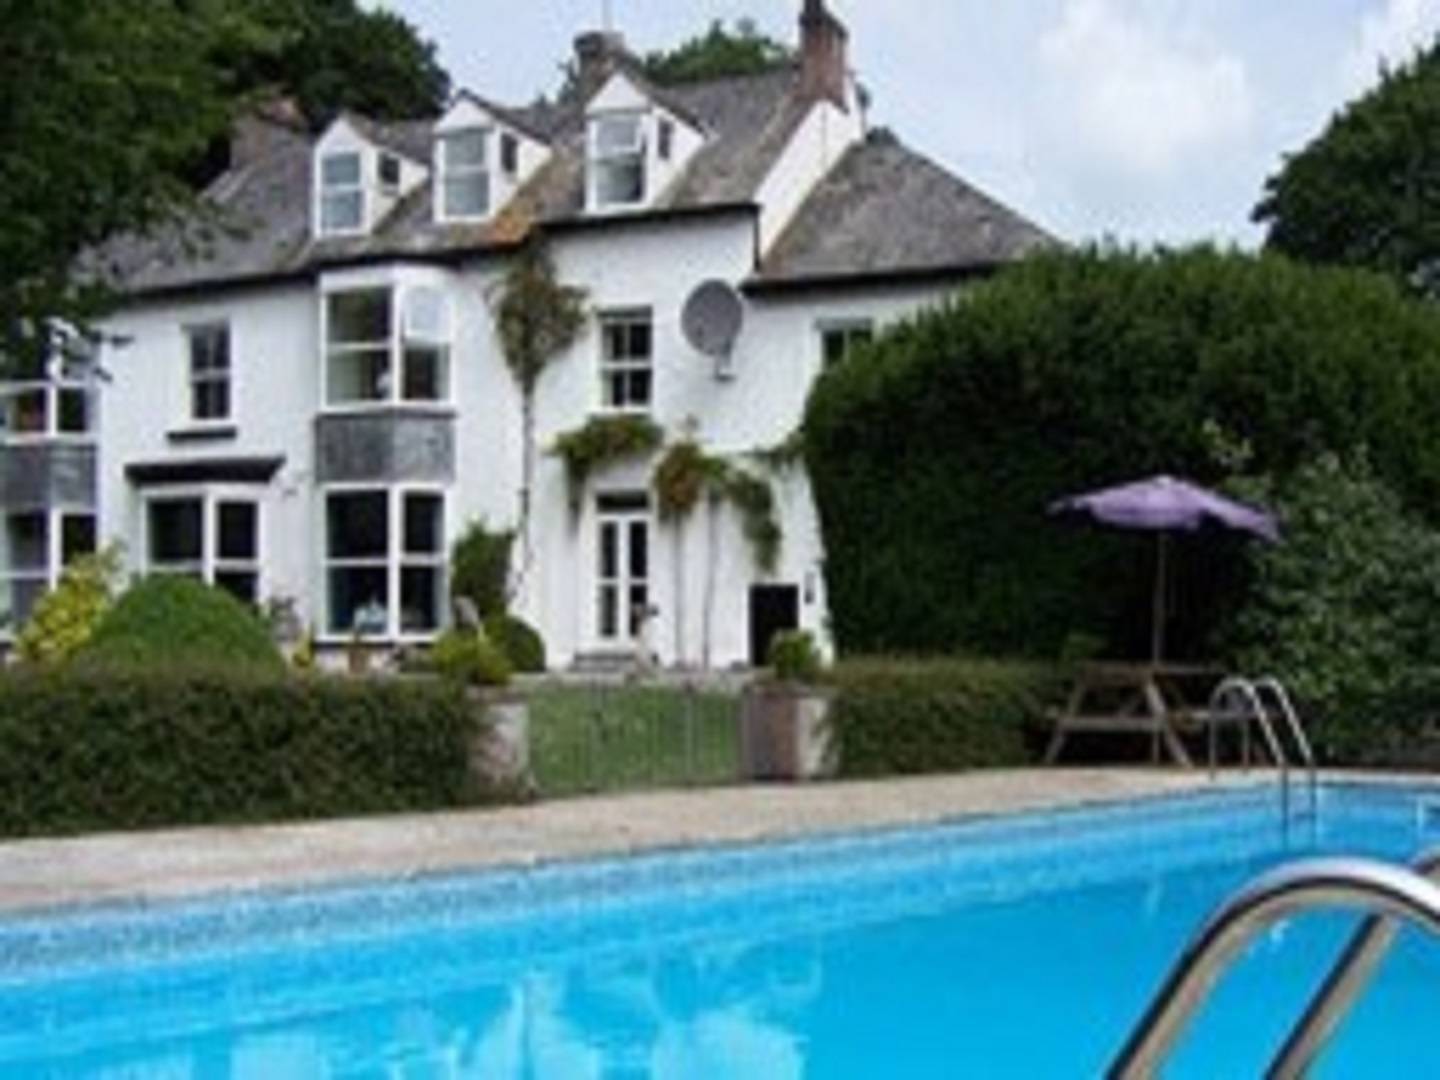 Bodmin Bed and Breakfast